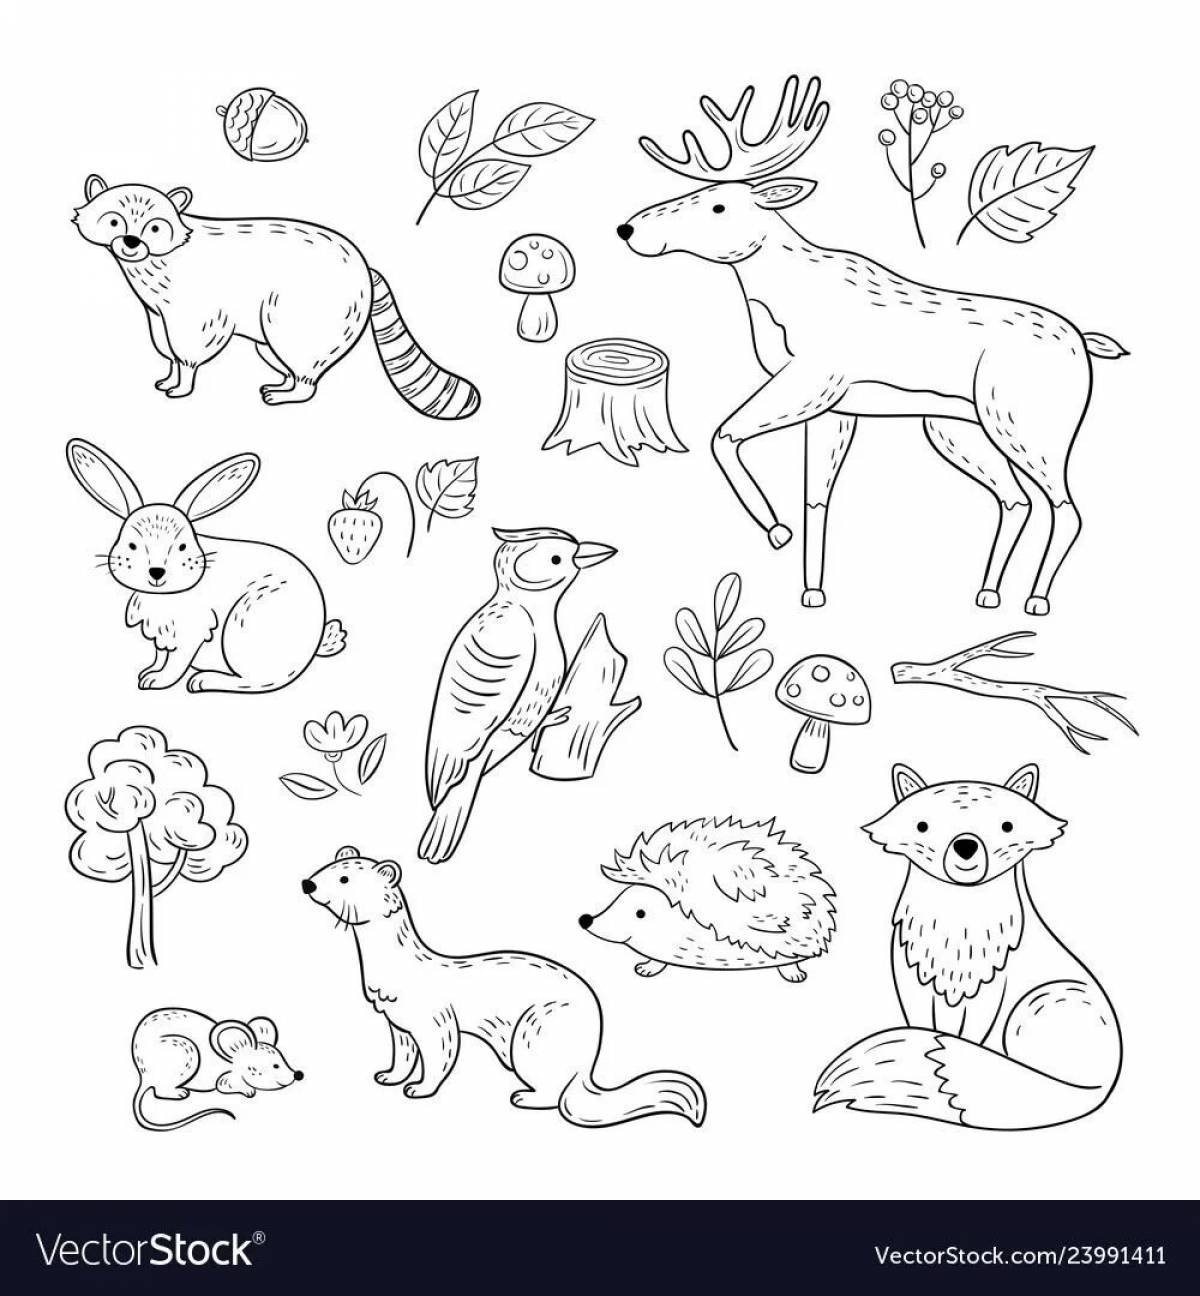 Fabulous wild animal coloring page